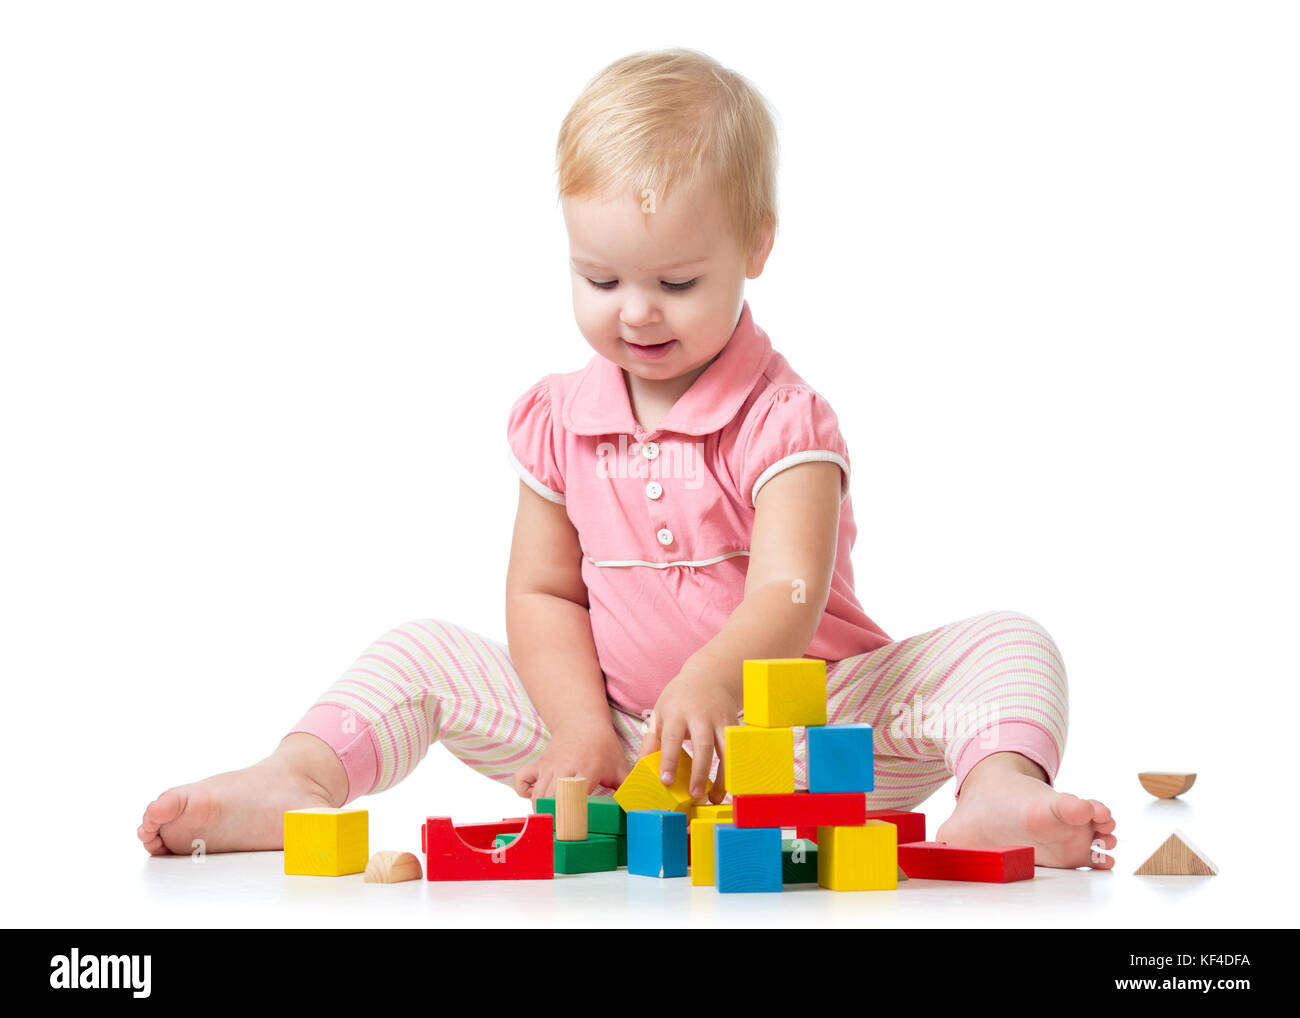 Kid playing with wooden block toys. Baby girl building castle using cubes. Educational toys for preschool and kindergarten child. Stock Photo